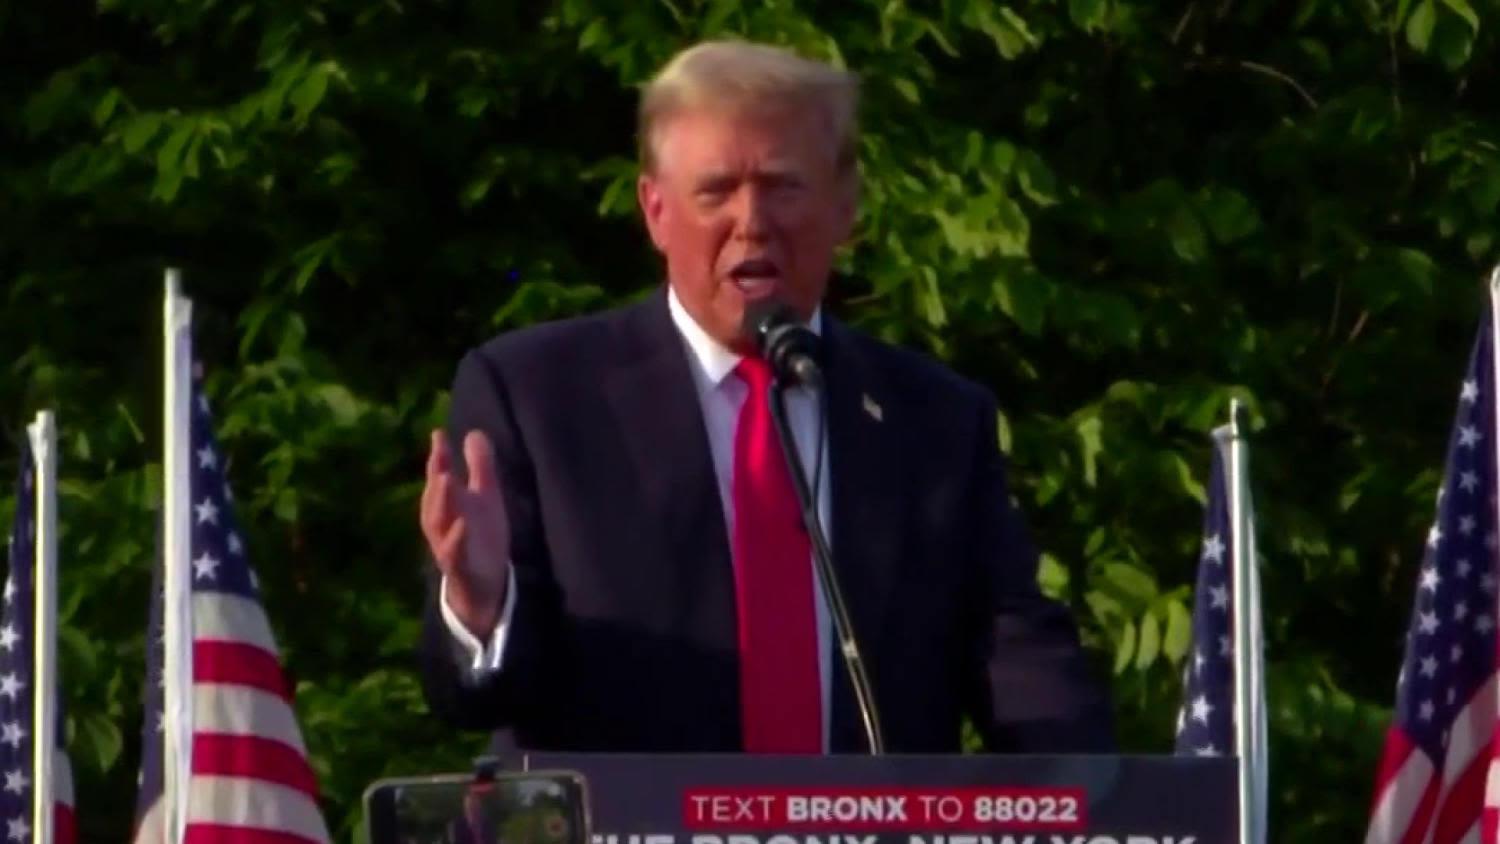 Donald Trump attempts to court voters of color in the Bronx